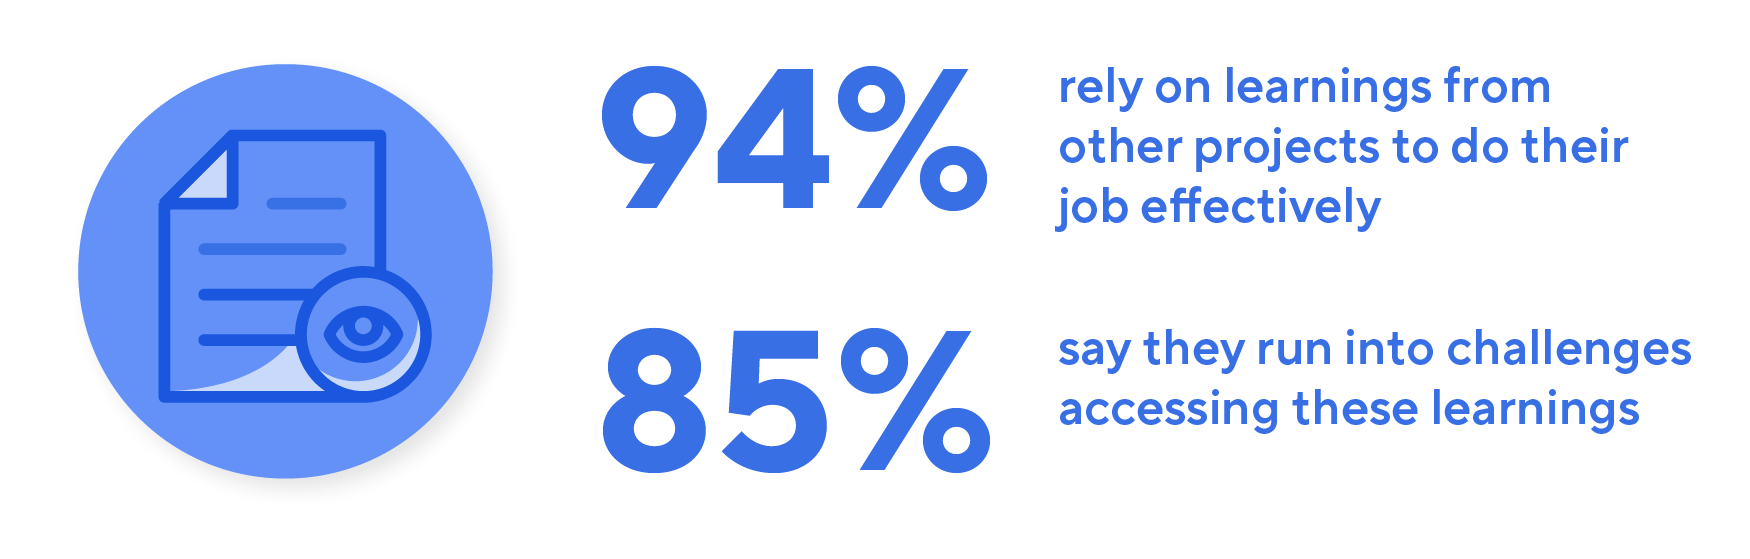 Infographic - 94% rely on learnings from other projects to do their job effectively, 85% say they run into challenges accessing these learnings